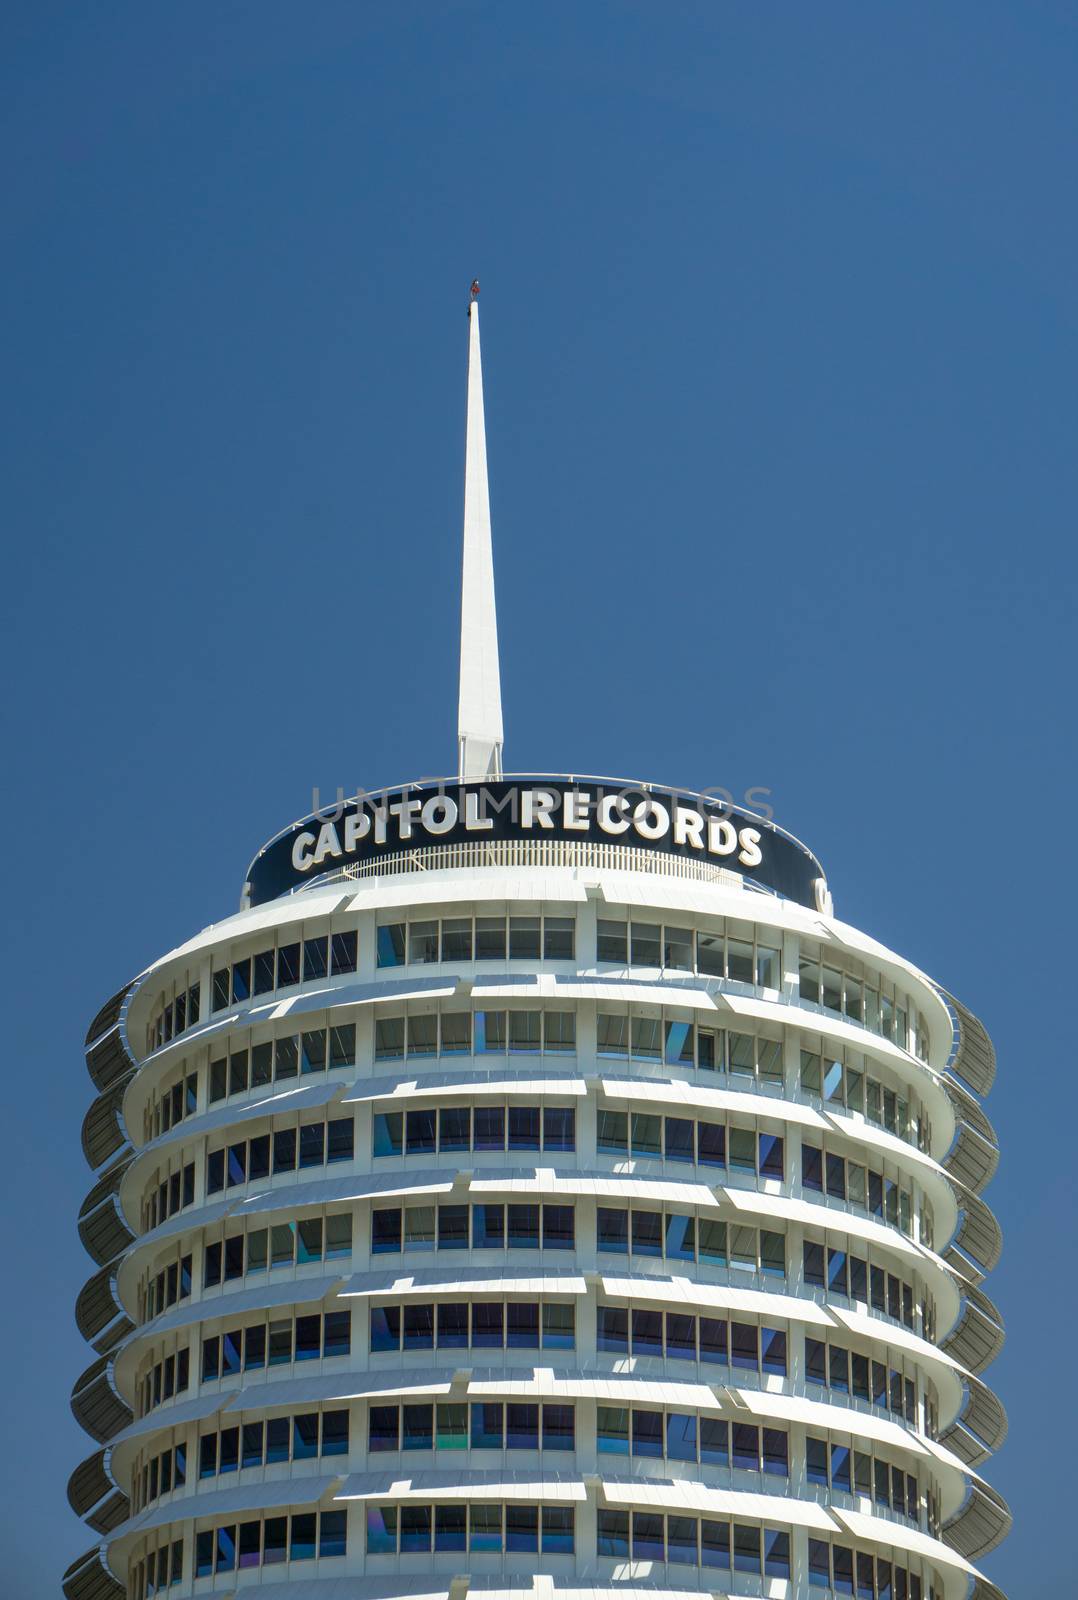 HOLLYWOOD, CA/USA - APRIL 18, 2015: Historic Capitol Records Building. Capitol Records is a major American record label that is part of the Capitol Music Group.